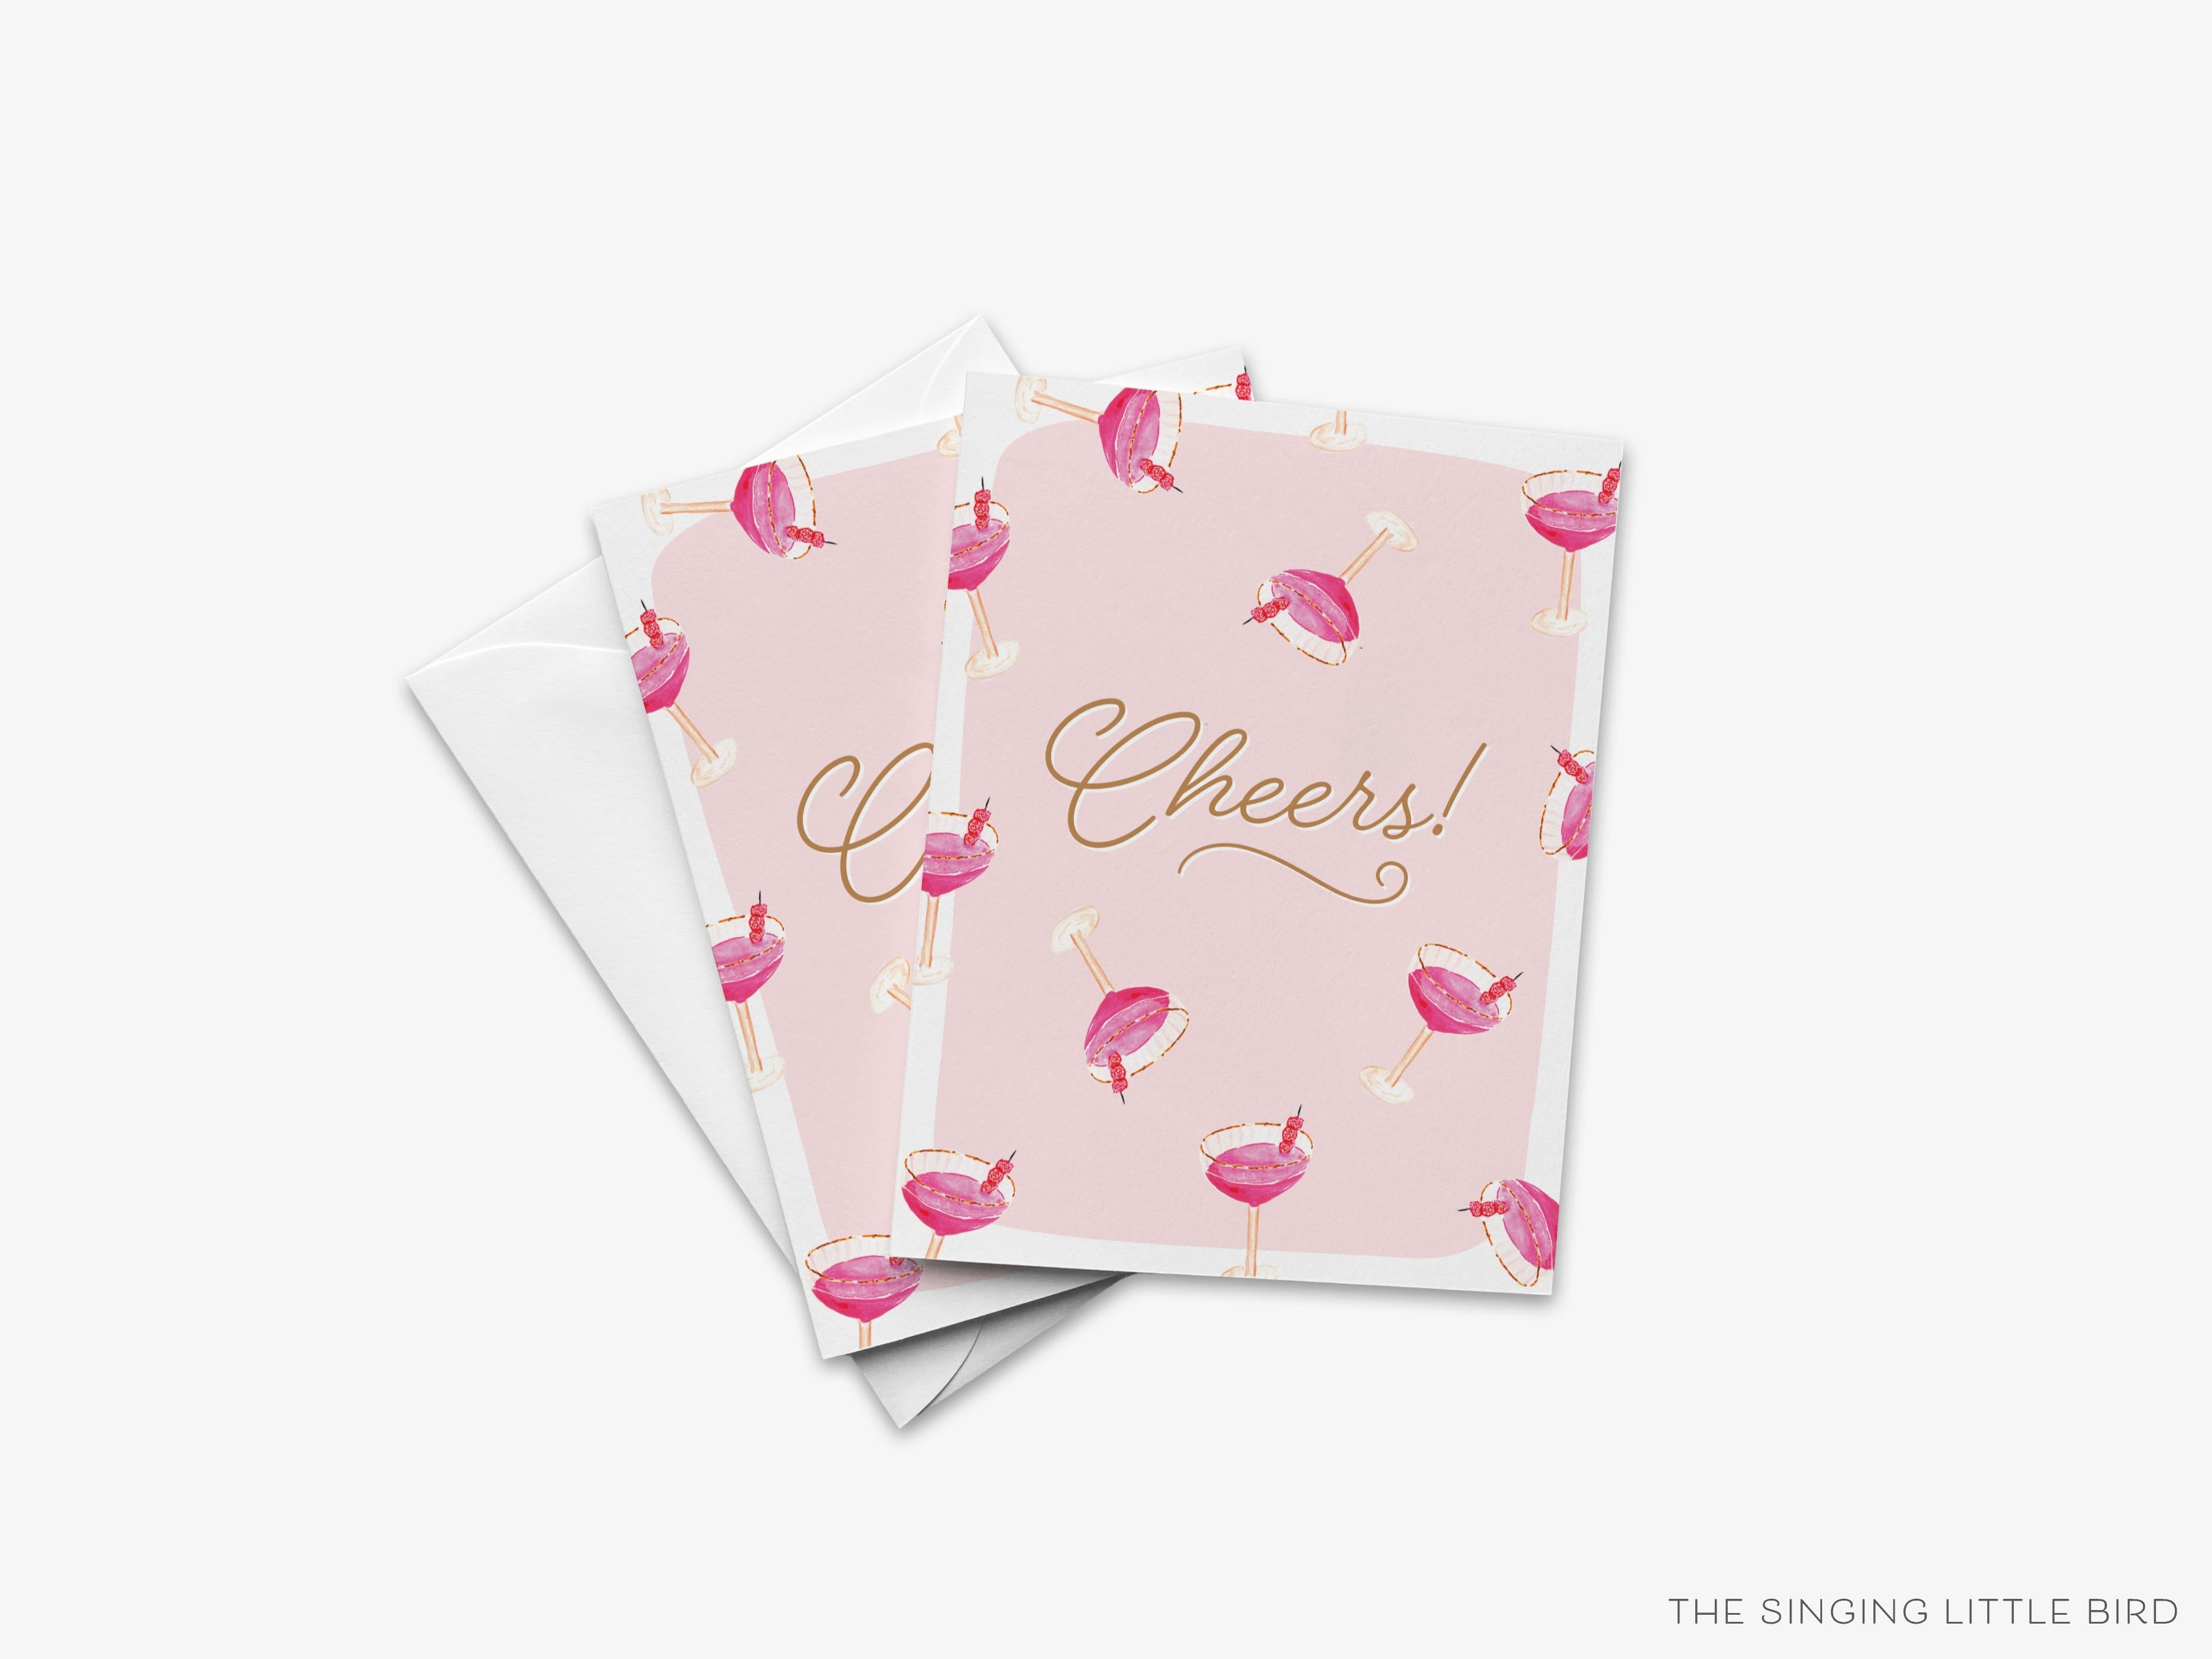 Cheers Pink Cocktail Greeting Card-These folded greeting cards are 4.25x5.5 and feature our hand-painted cocktail glasses, printed in the USA on 100lb textured stock. They come with a White envelope and make a great congratulations or birthday card for the cocktail lover in your life.-The Singing Little Bird